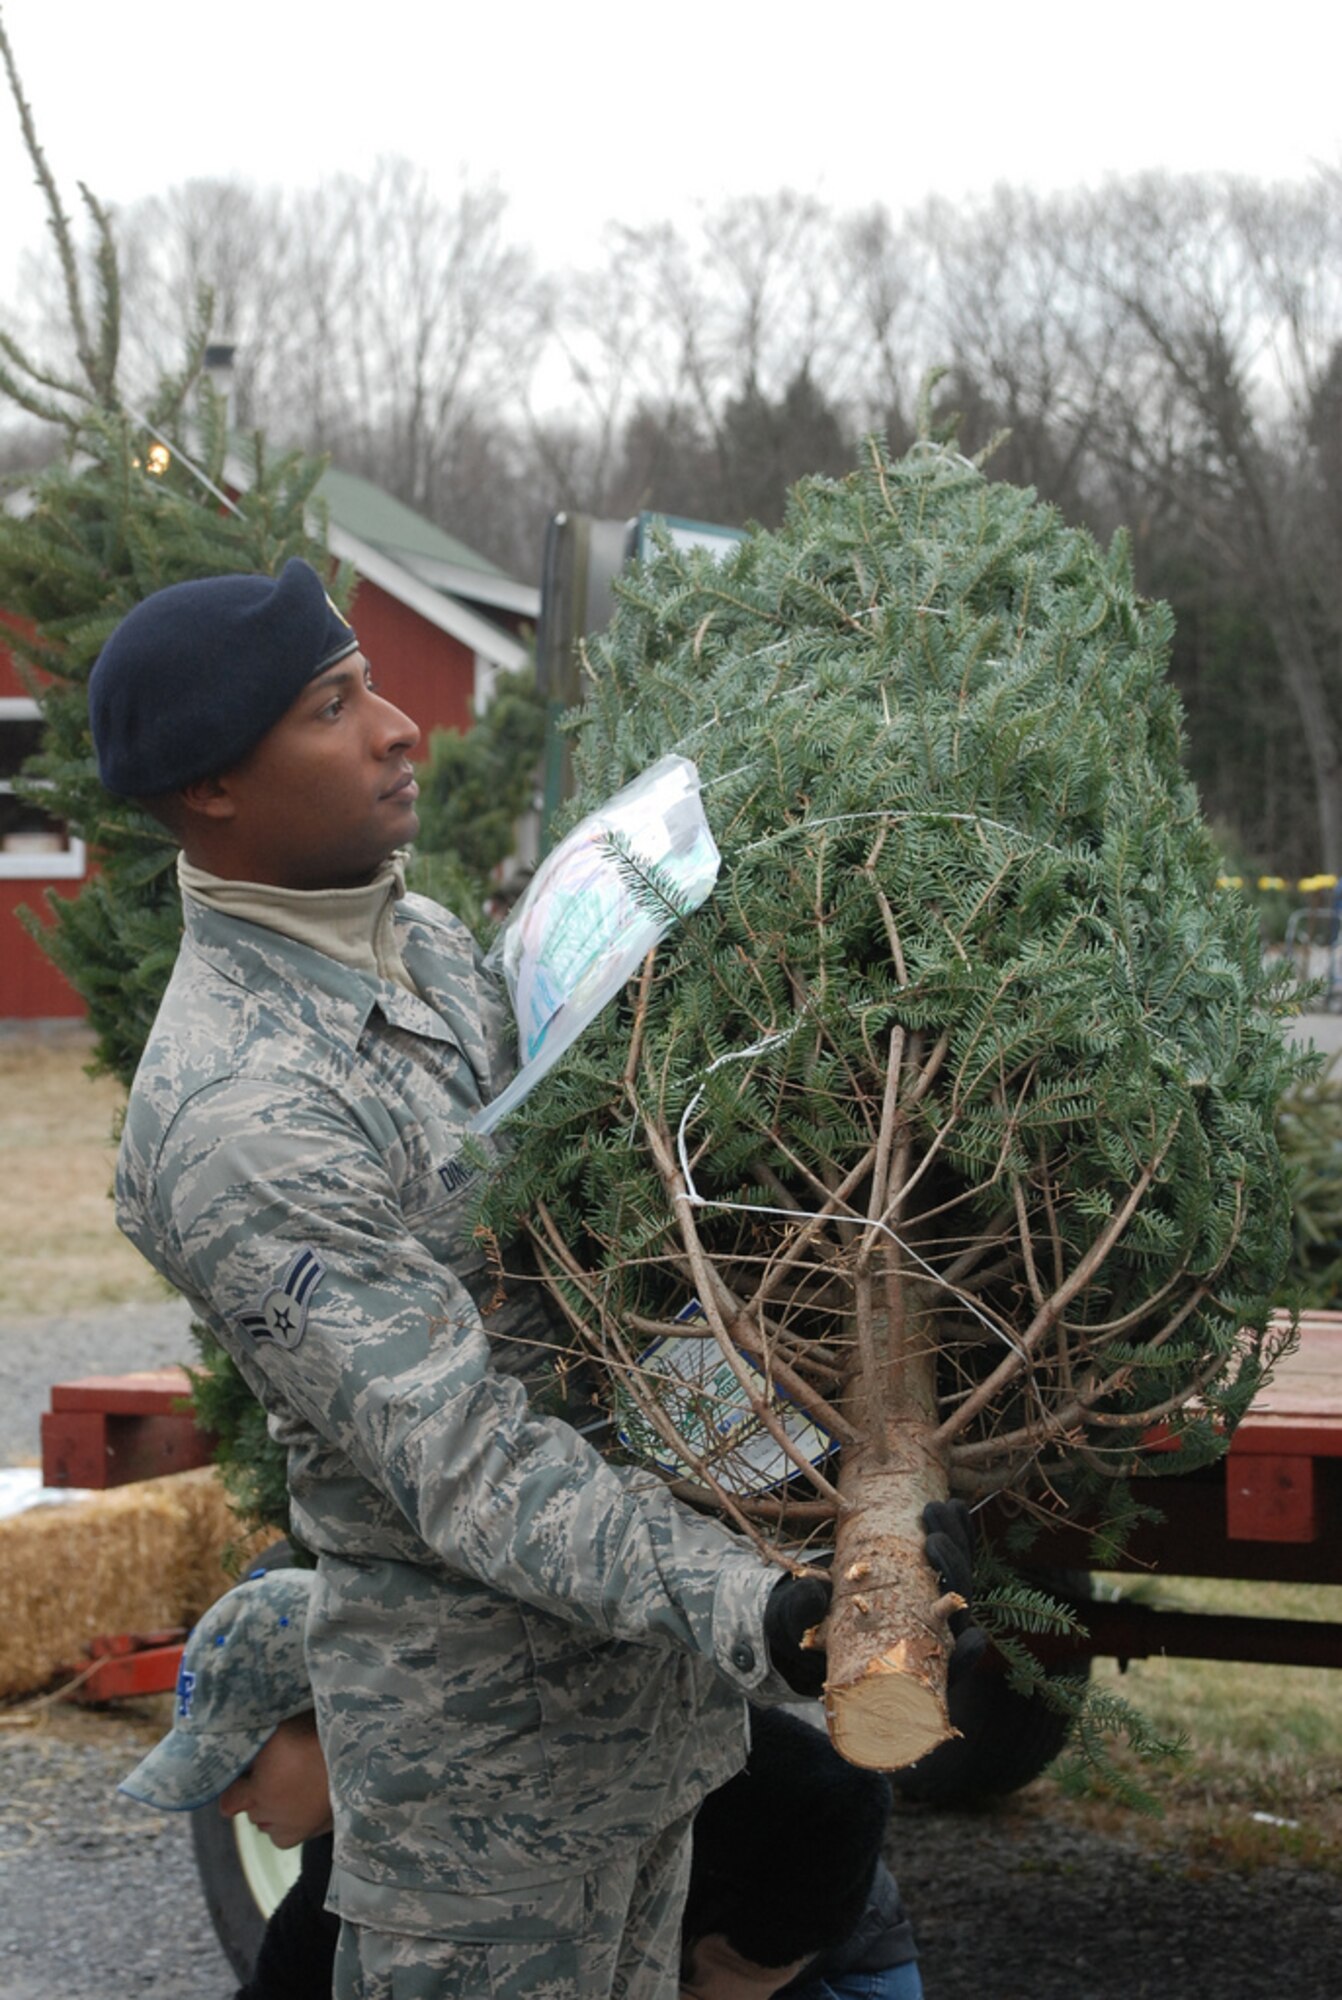 BALLSTON SPA, N.Y. -- New York Air National Guard members of the 109th Airlift Wing from Scotia, N.Y. volunteer their time to assist FedEx driver Don Pelletier load Christmas Trees here at Ellms Christmas Tree Farm Dec. 7. Nearly 20 Airmen volunteered to assist in the annual "Trees for Troops" loading of about 150 donated trees bound for military installations and families around the country and the globe. U.S. Army photo by Col. Richard Goldenberg, New York Army National Guard. (RELEASED)